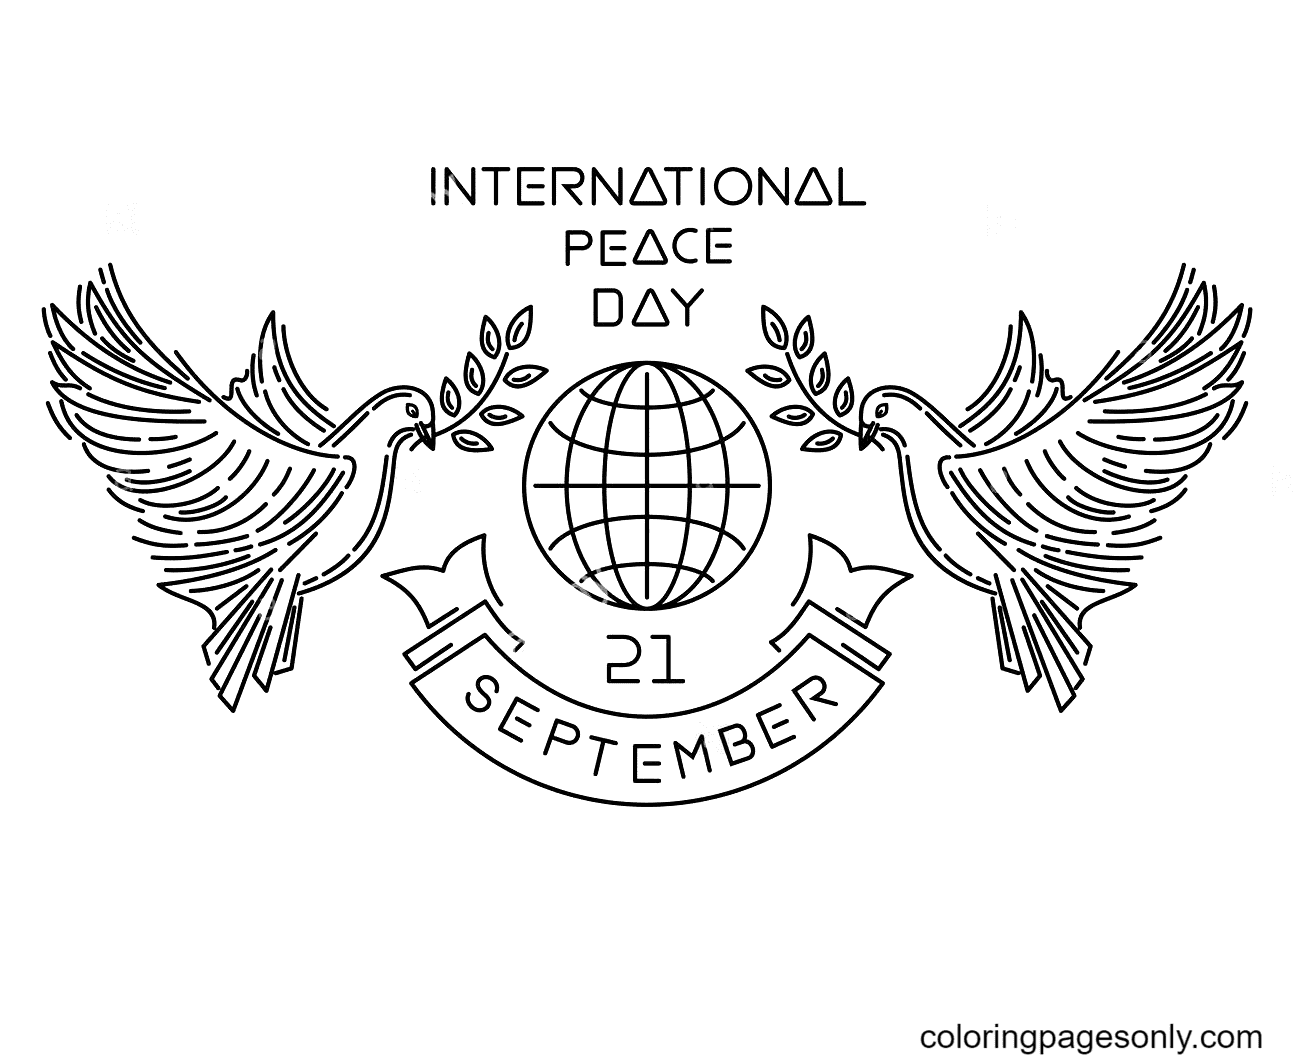 International Peace Day known as World Peace Day Coloring Pages